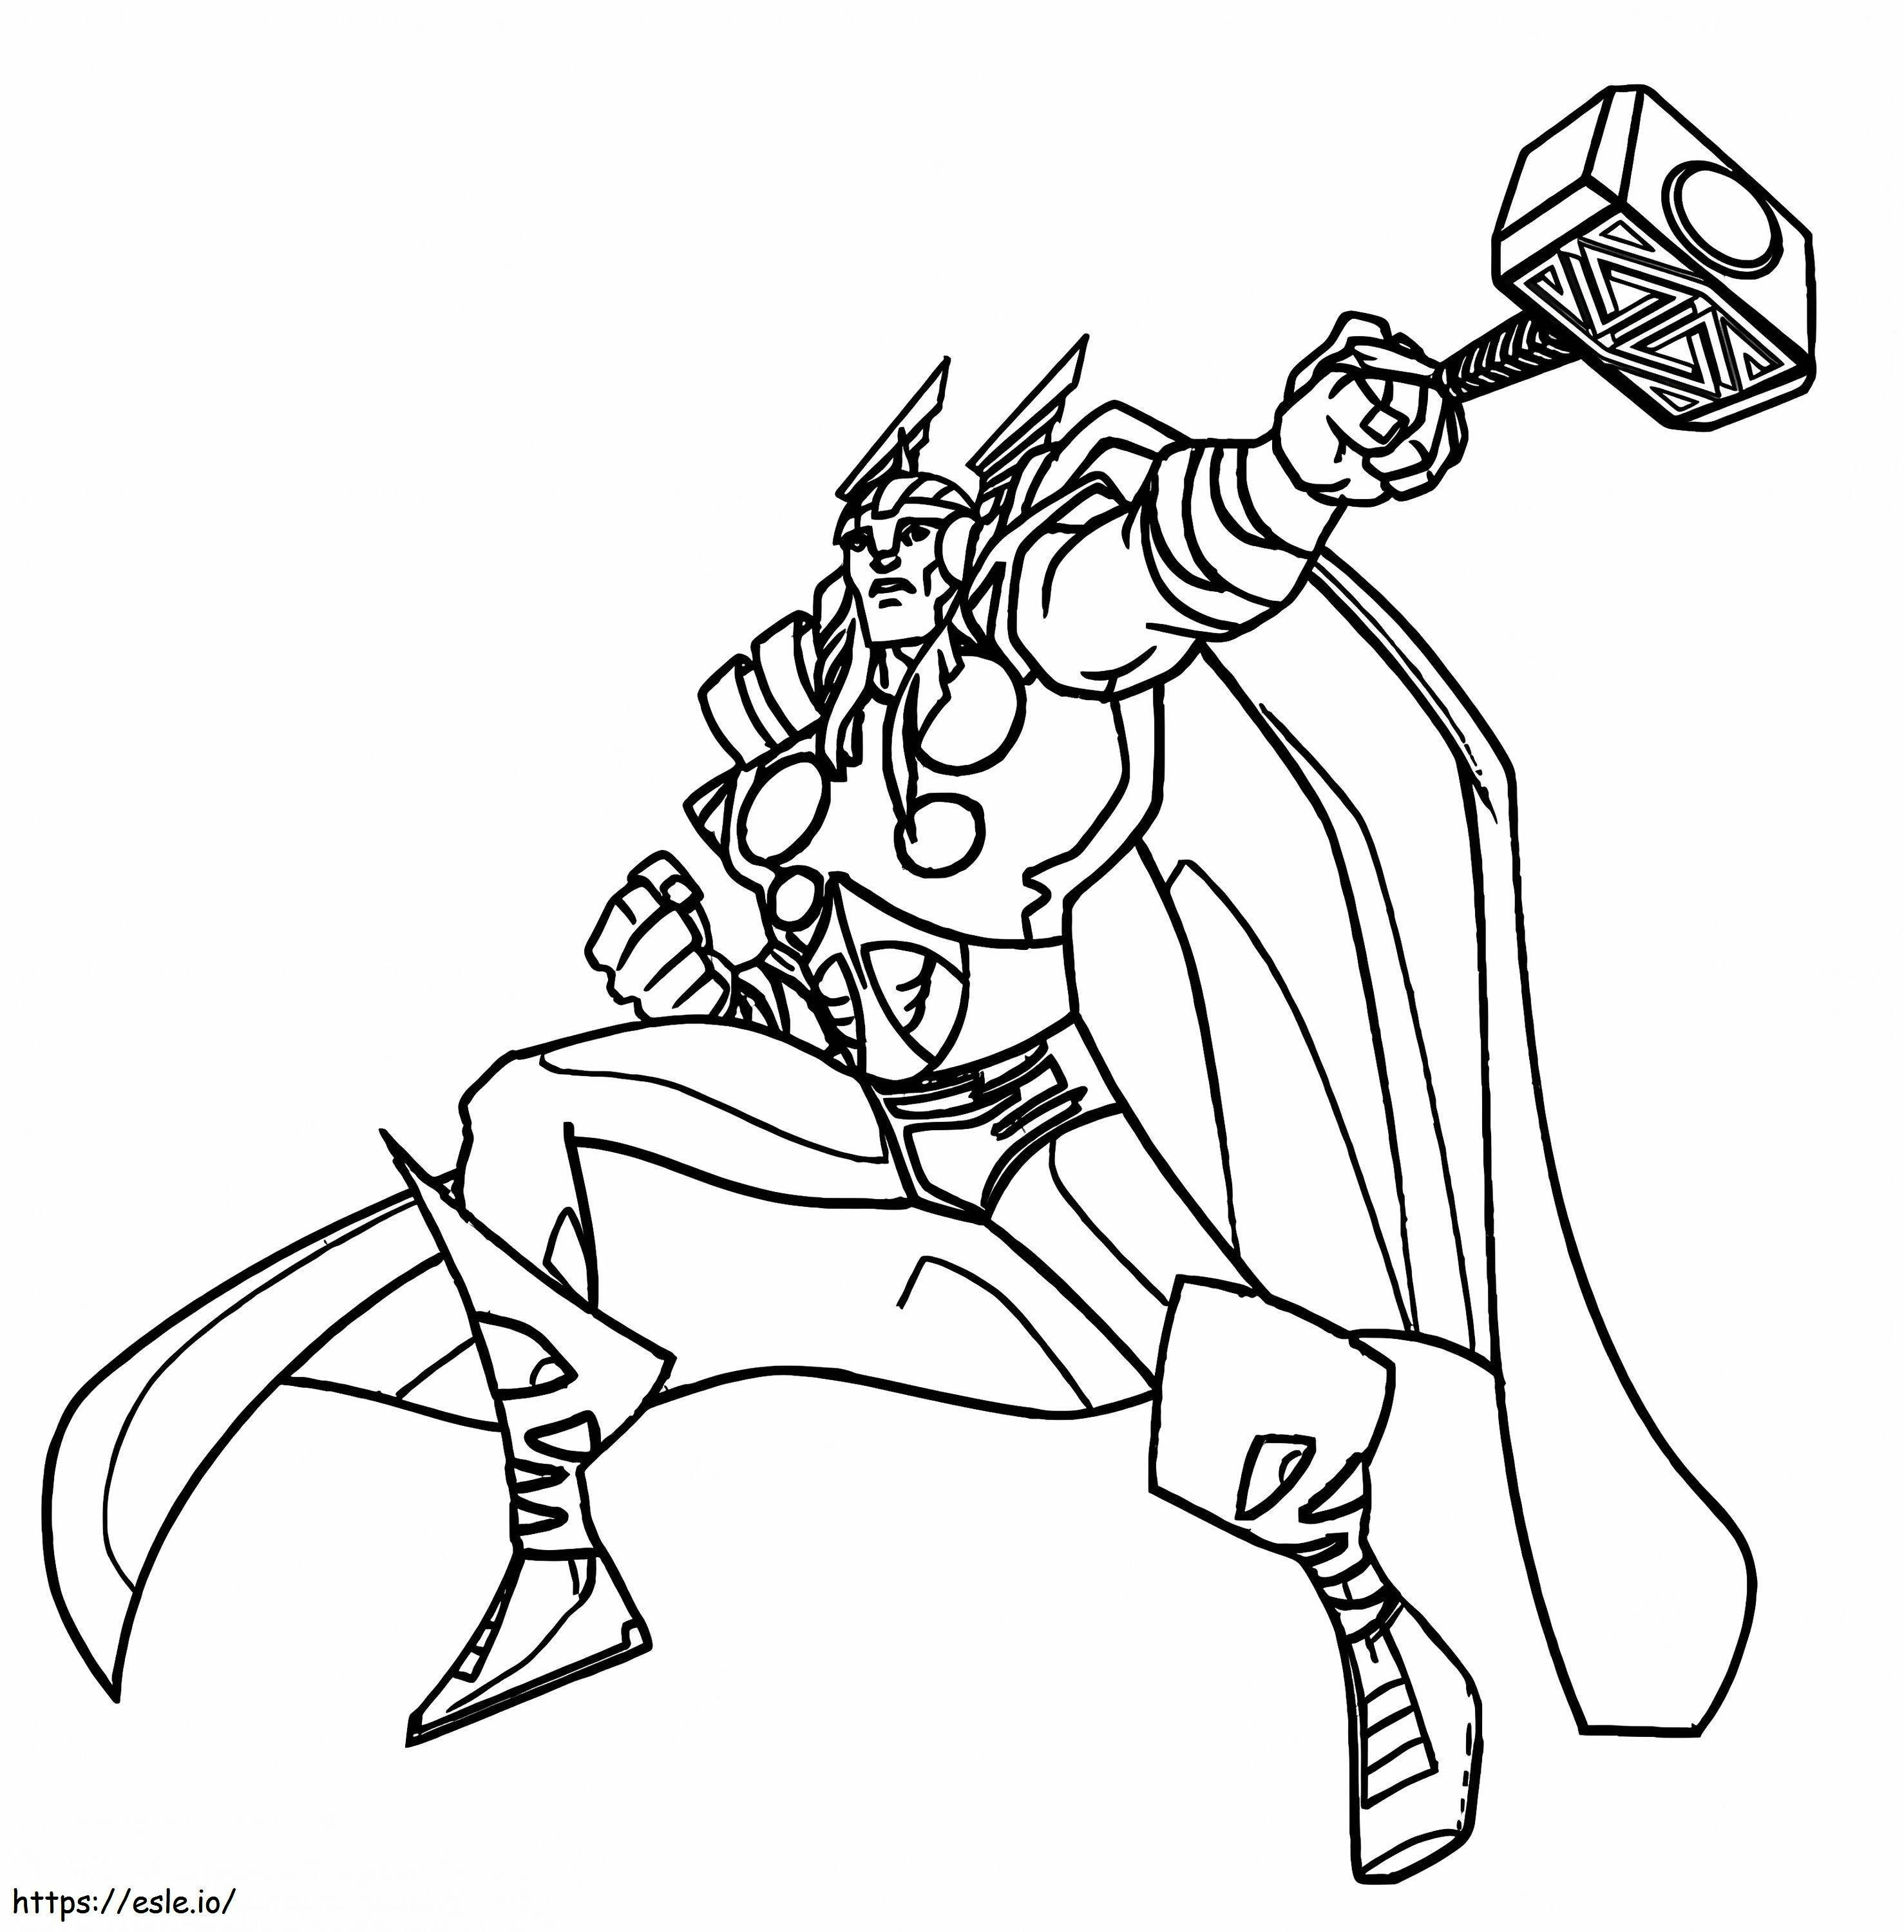 Cartoon Thor coloring page